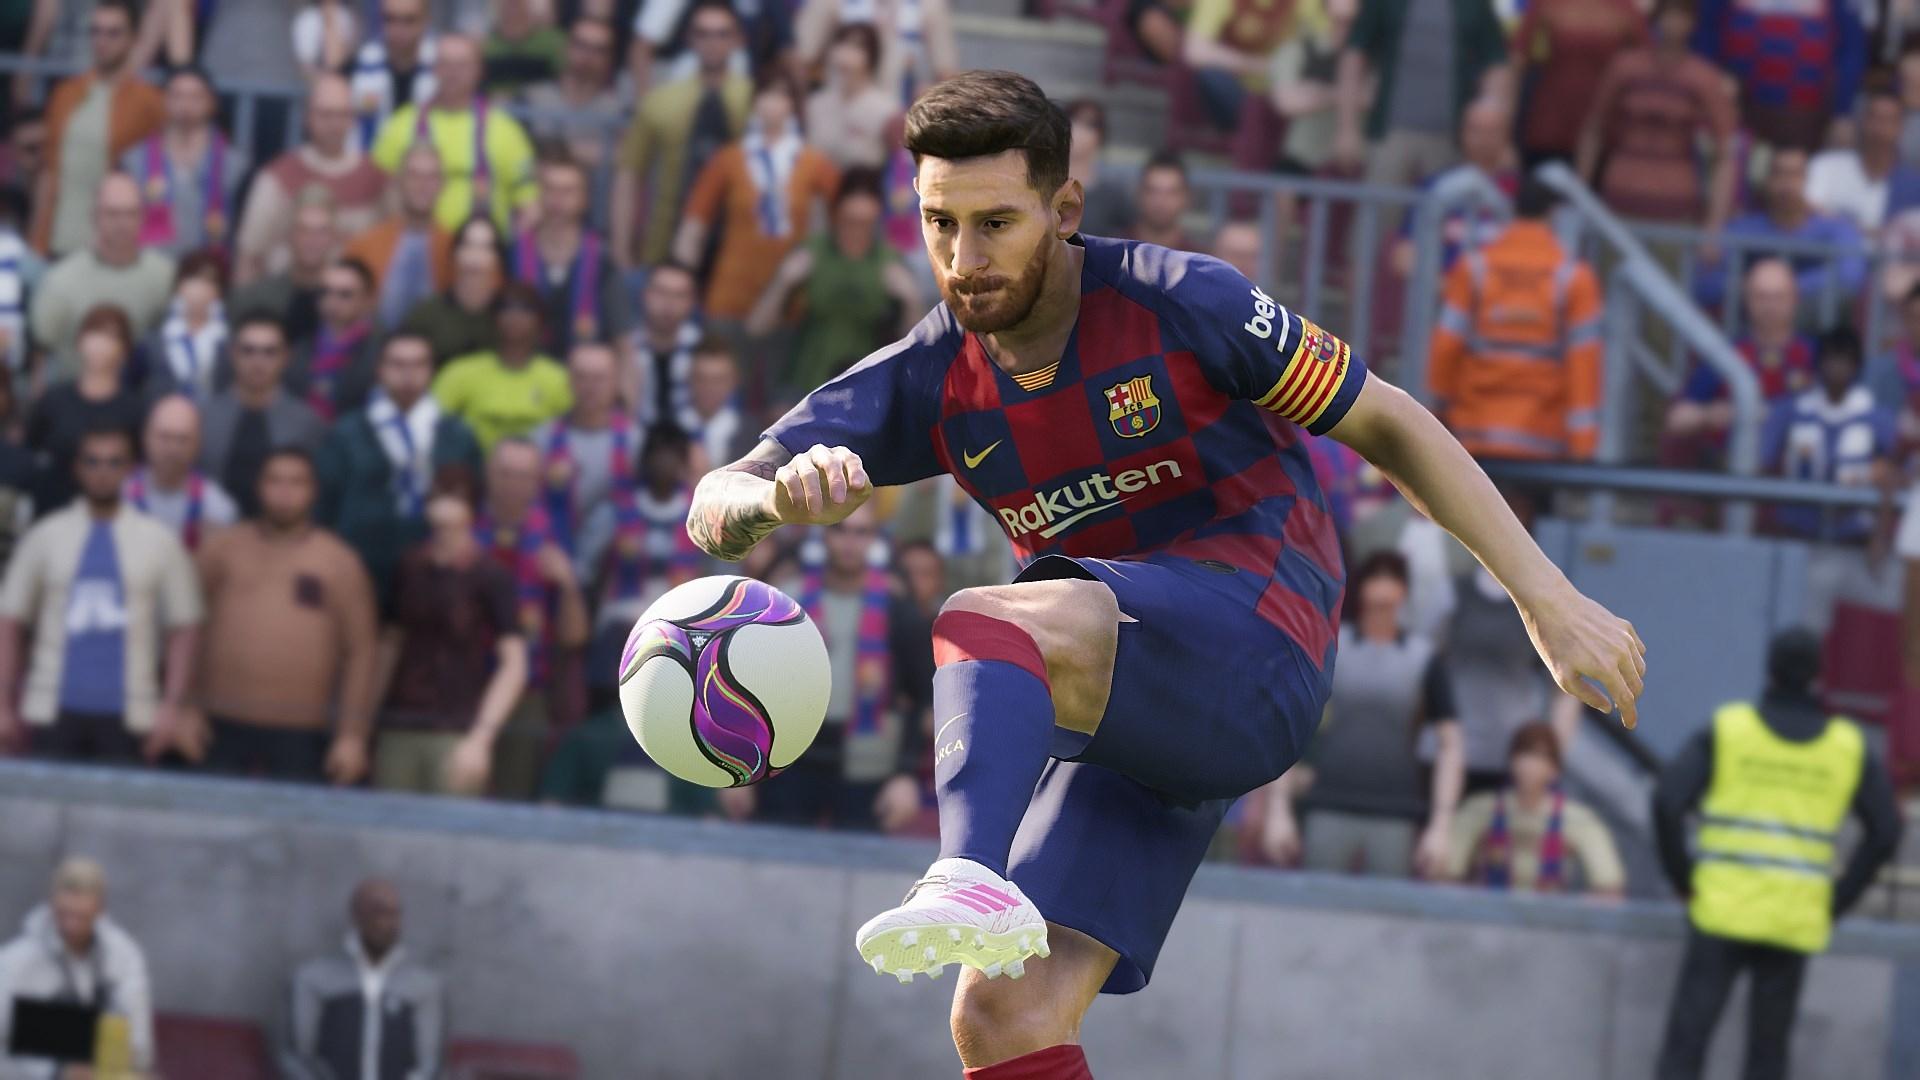 Lionel Messi In eFootball PES 2020 Wallpaper, HD Games 4K